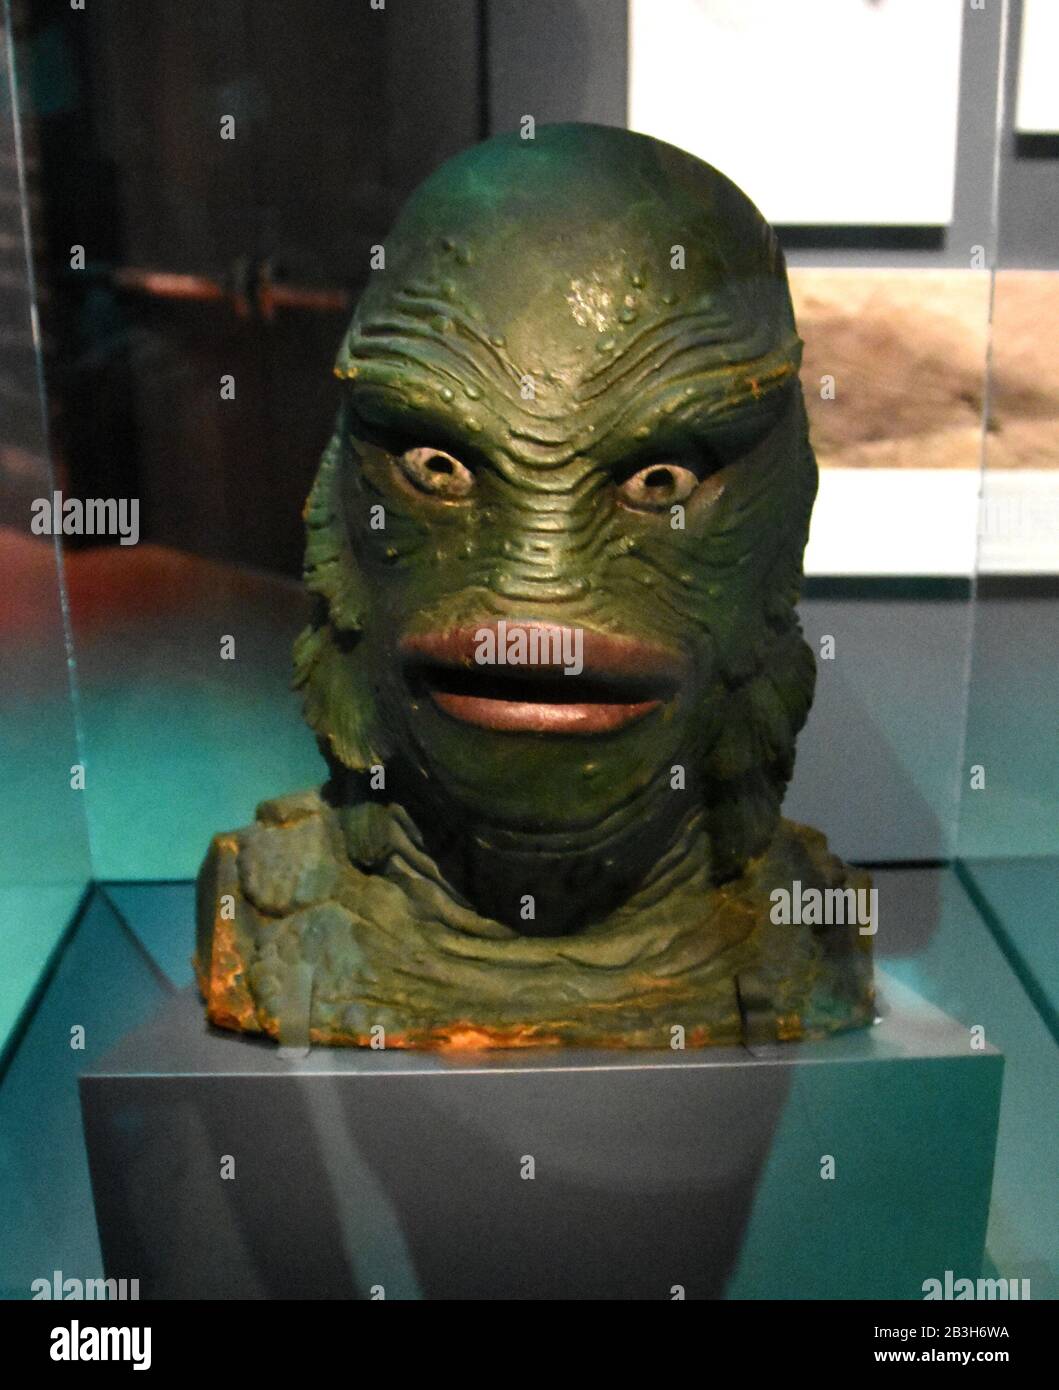 Los Angeles, California, USA 3rd March 2020 A general view of atmosphere of the Creature from the Black Lagoon in Natural History of Horror Exhibit on March 3, 2020 at the Natural History Museum in Los Angeles, California, USA. Photo by Barry King/Alamy Stock Photo Stock Photo